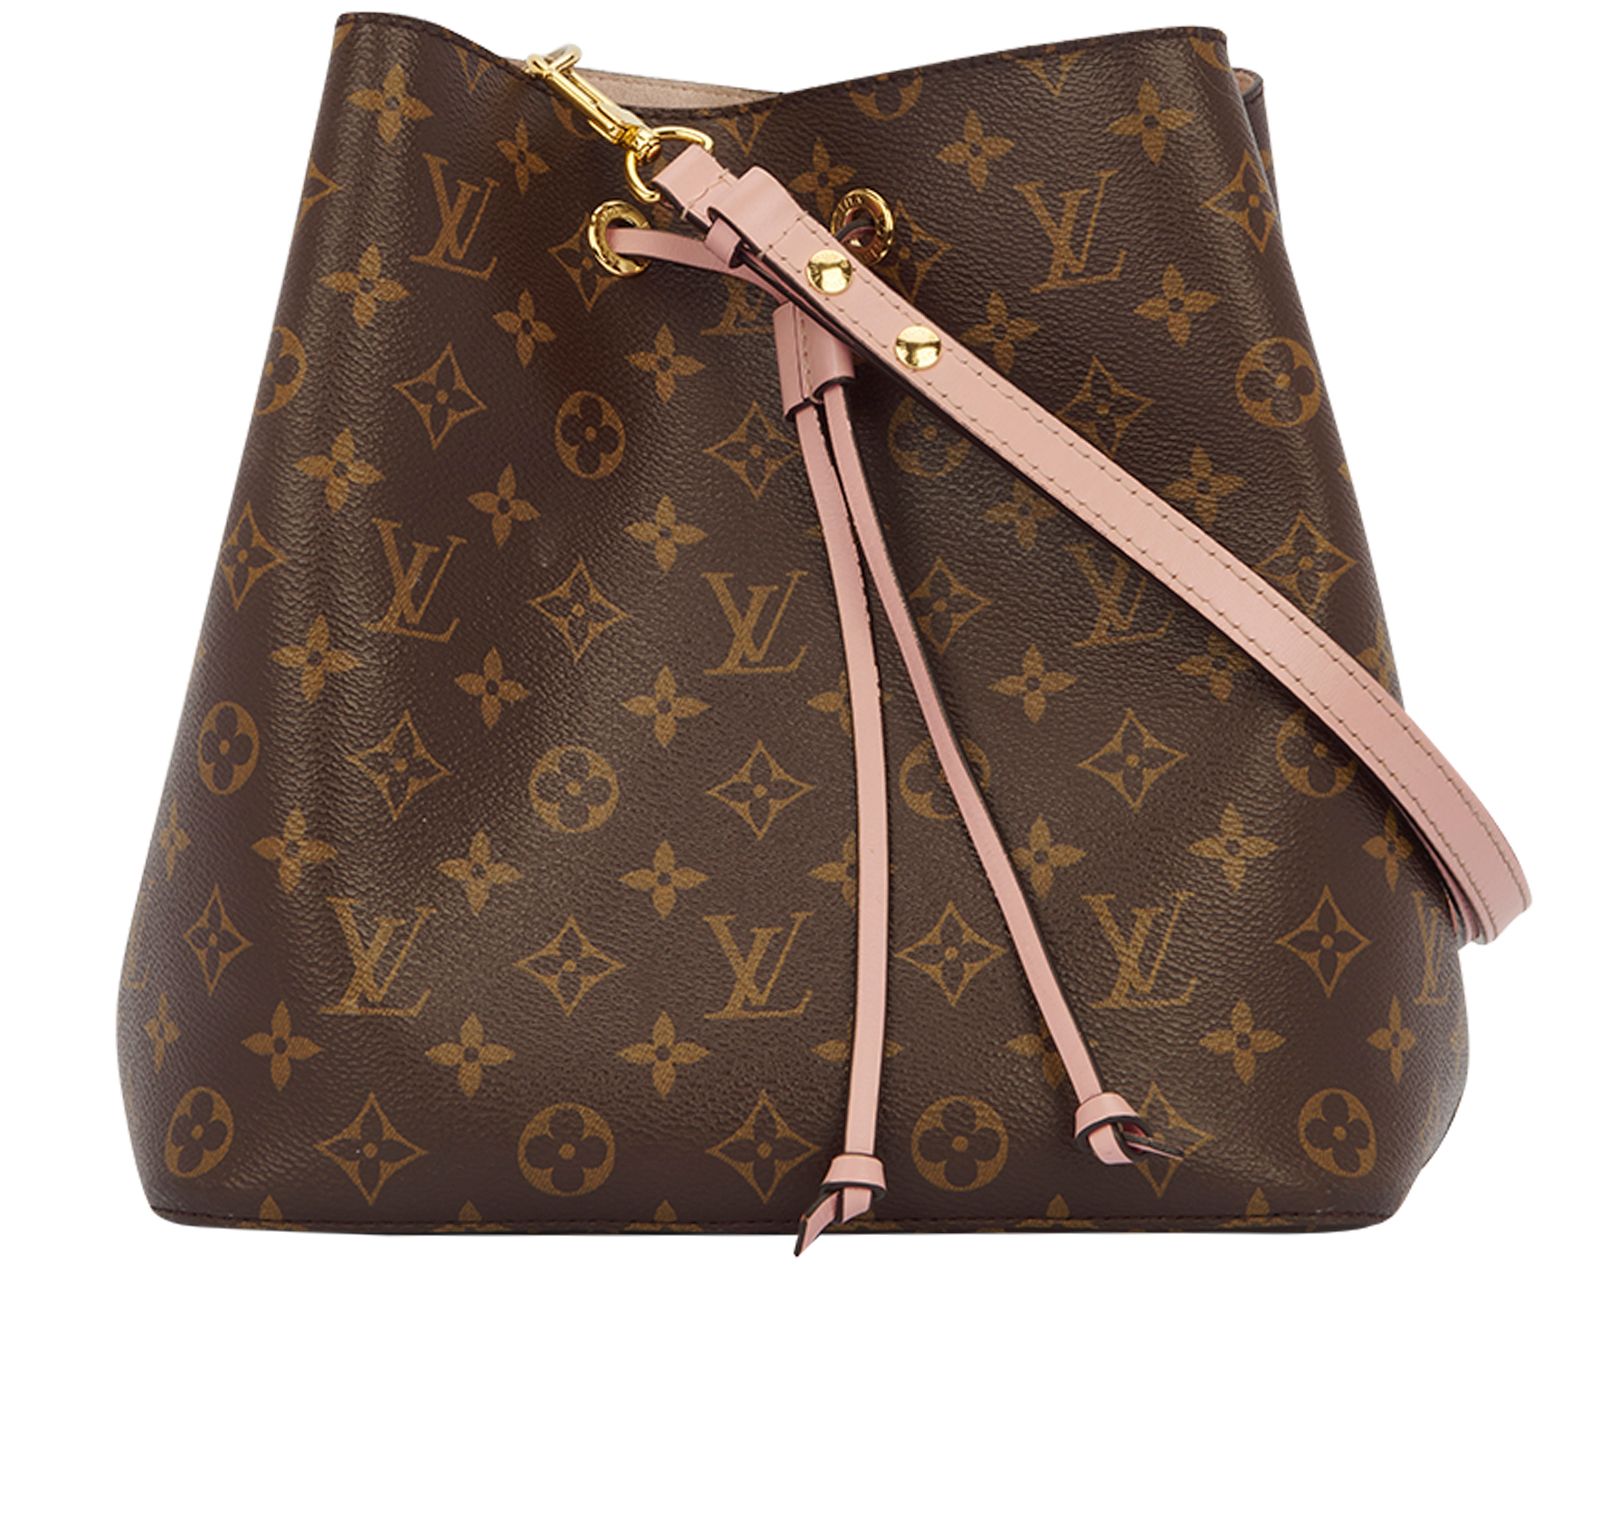 Designer Exchange Ltd - How cool is our latest LV? This limited